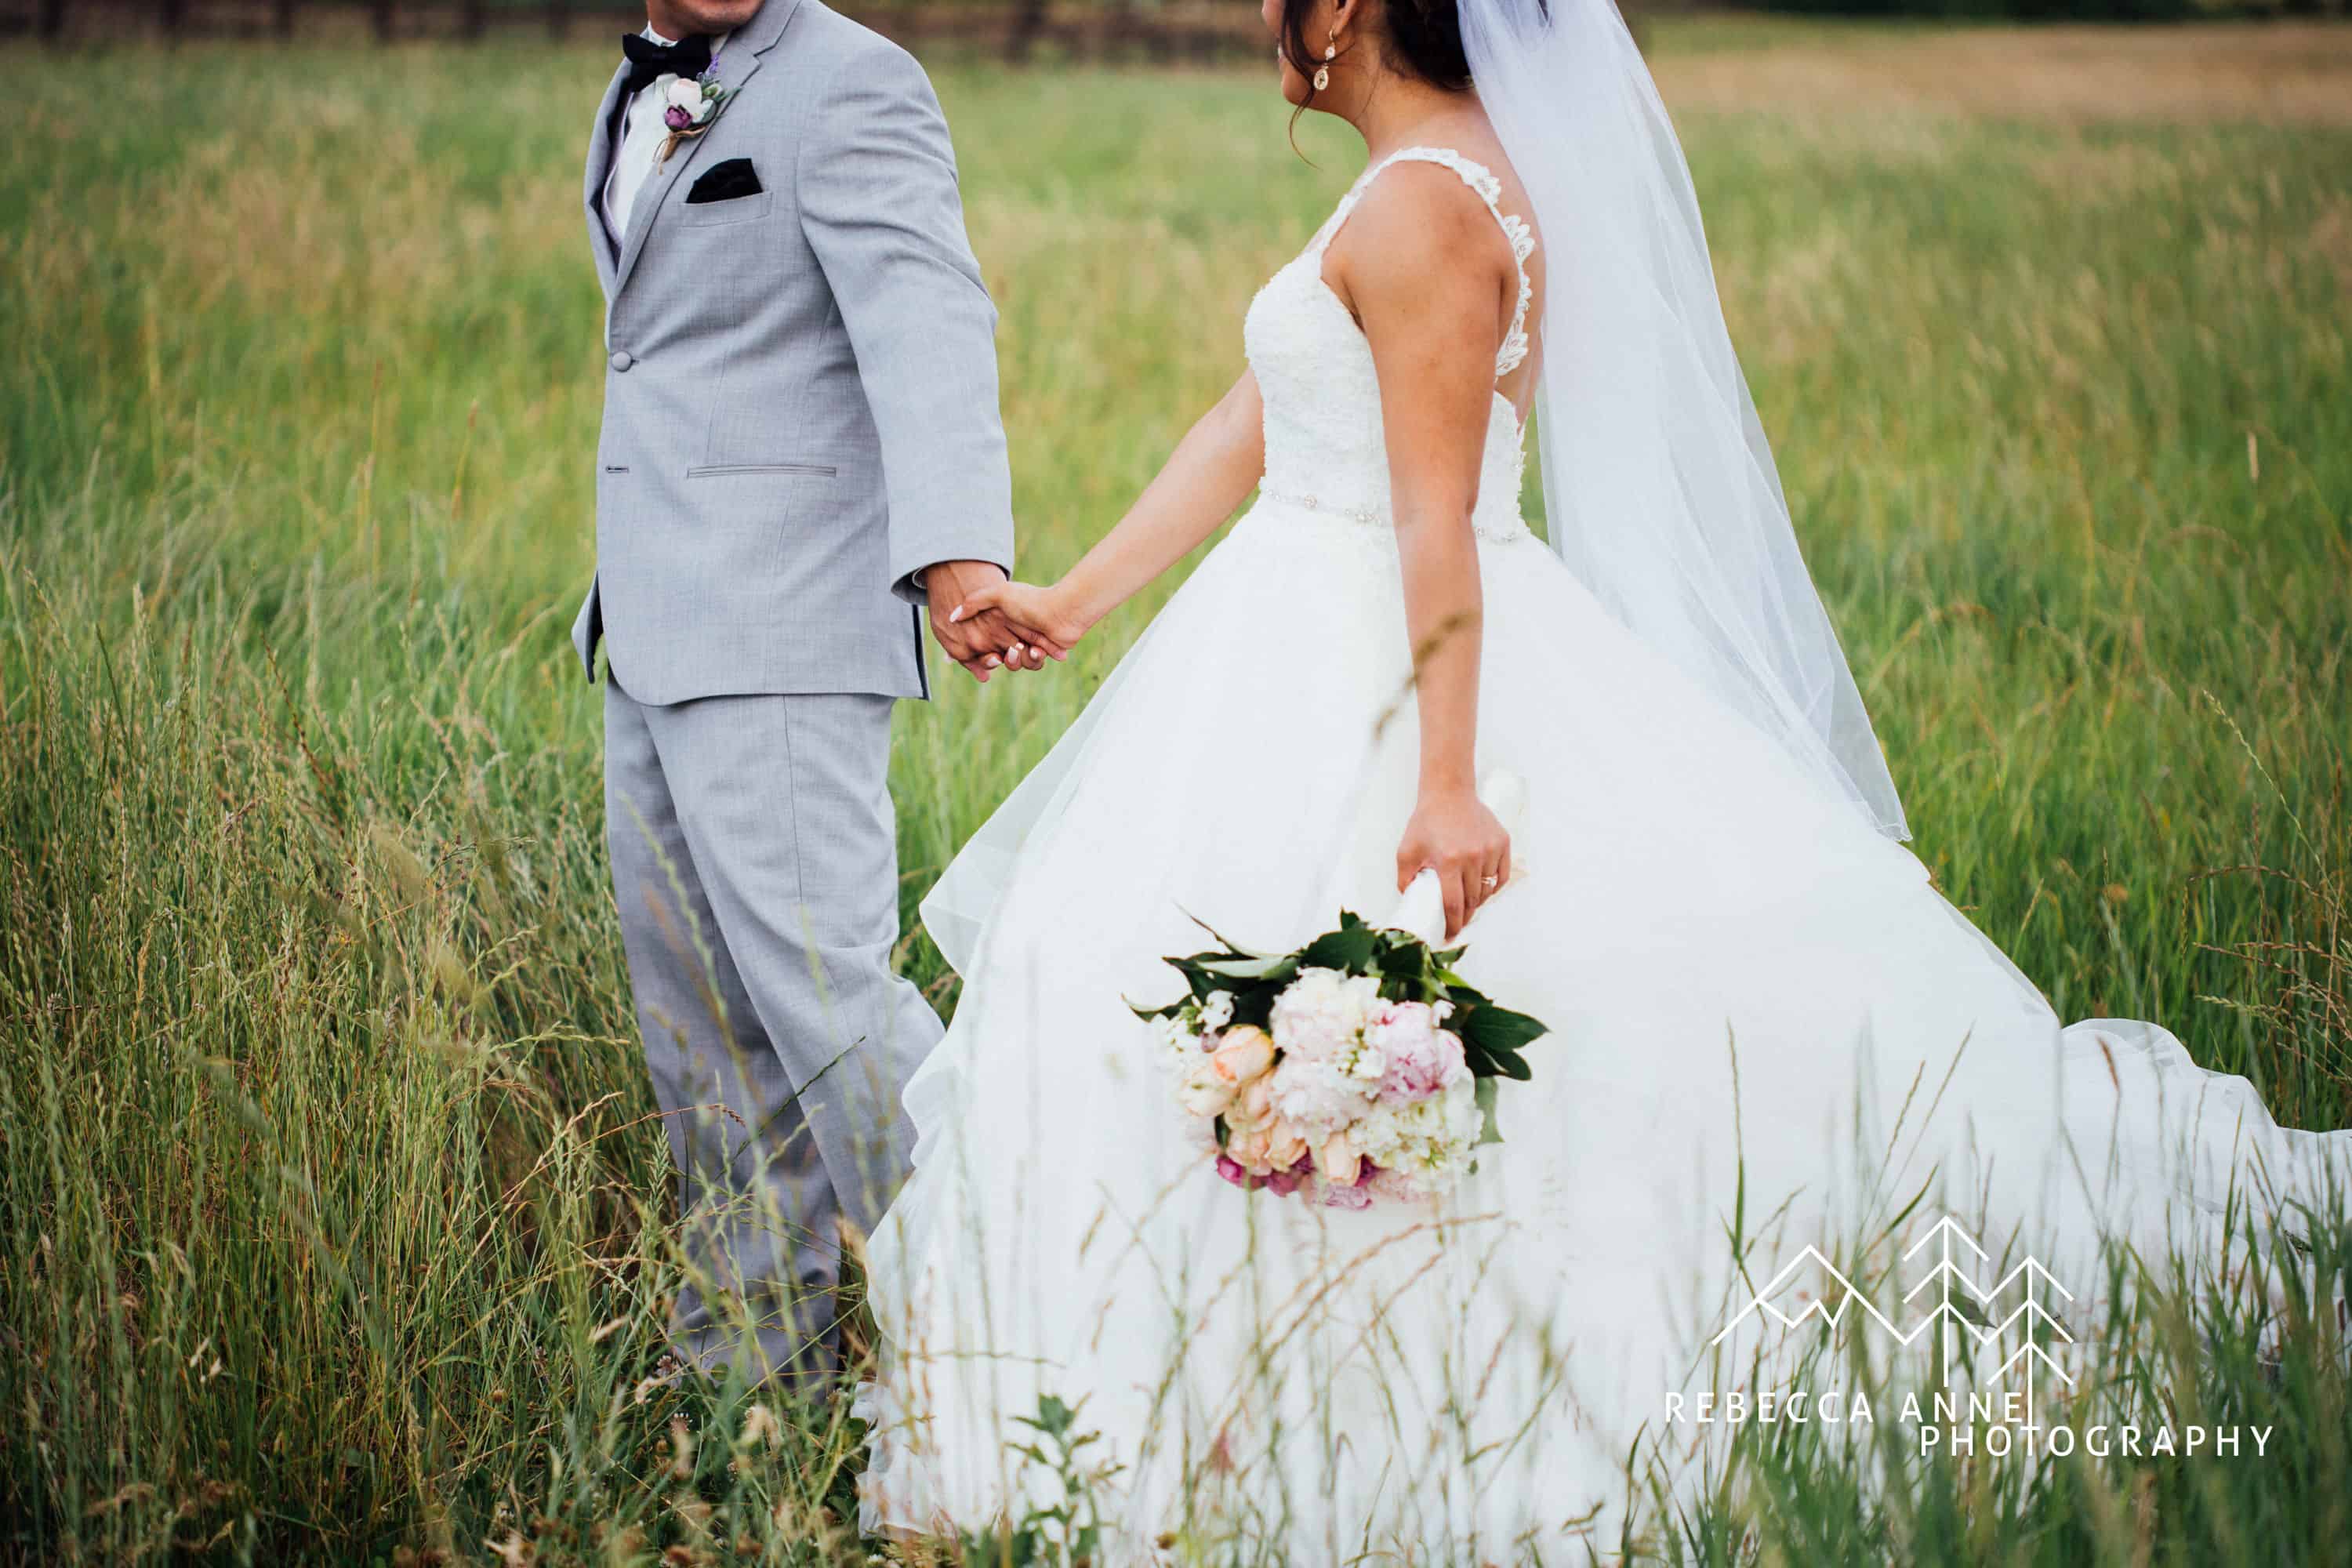 Rebecca & Kevin Rose Gold Wedding at Mountain View Manor Rebecca Anne Photography